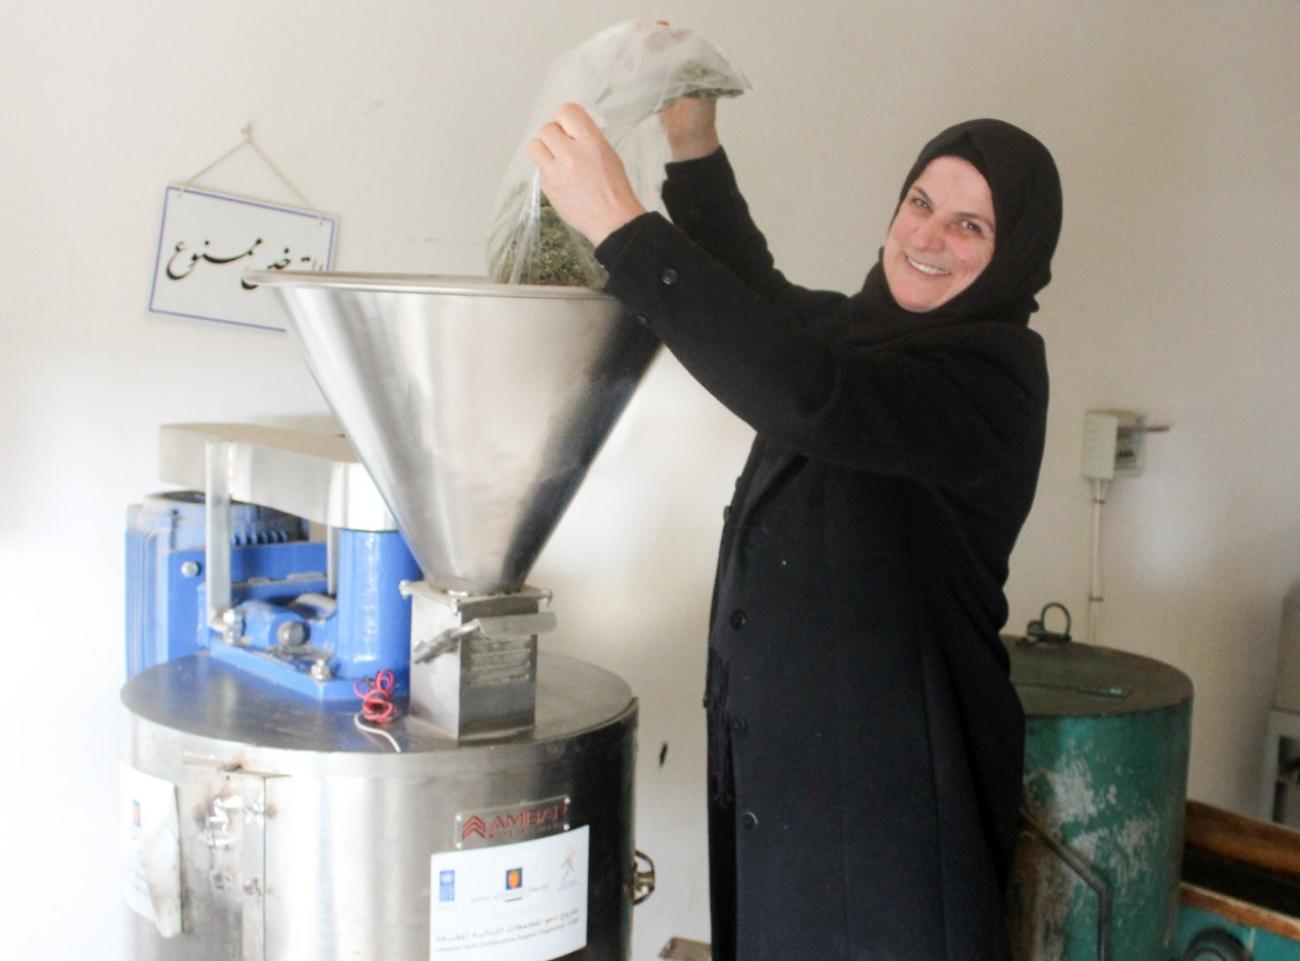 "Our goal was to improve quality and save time and effort,” says Fatima